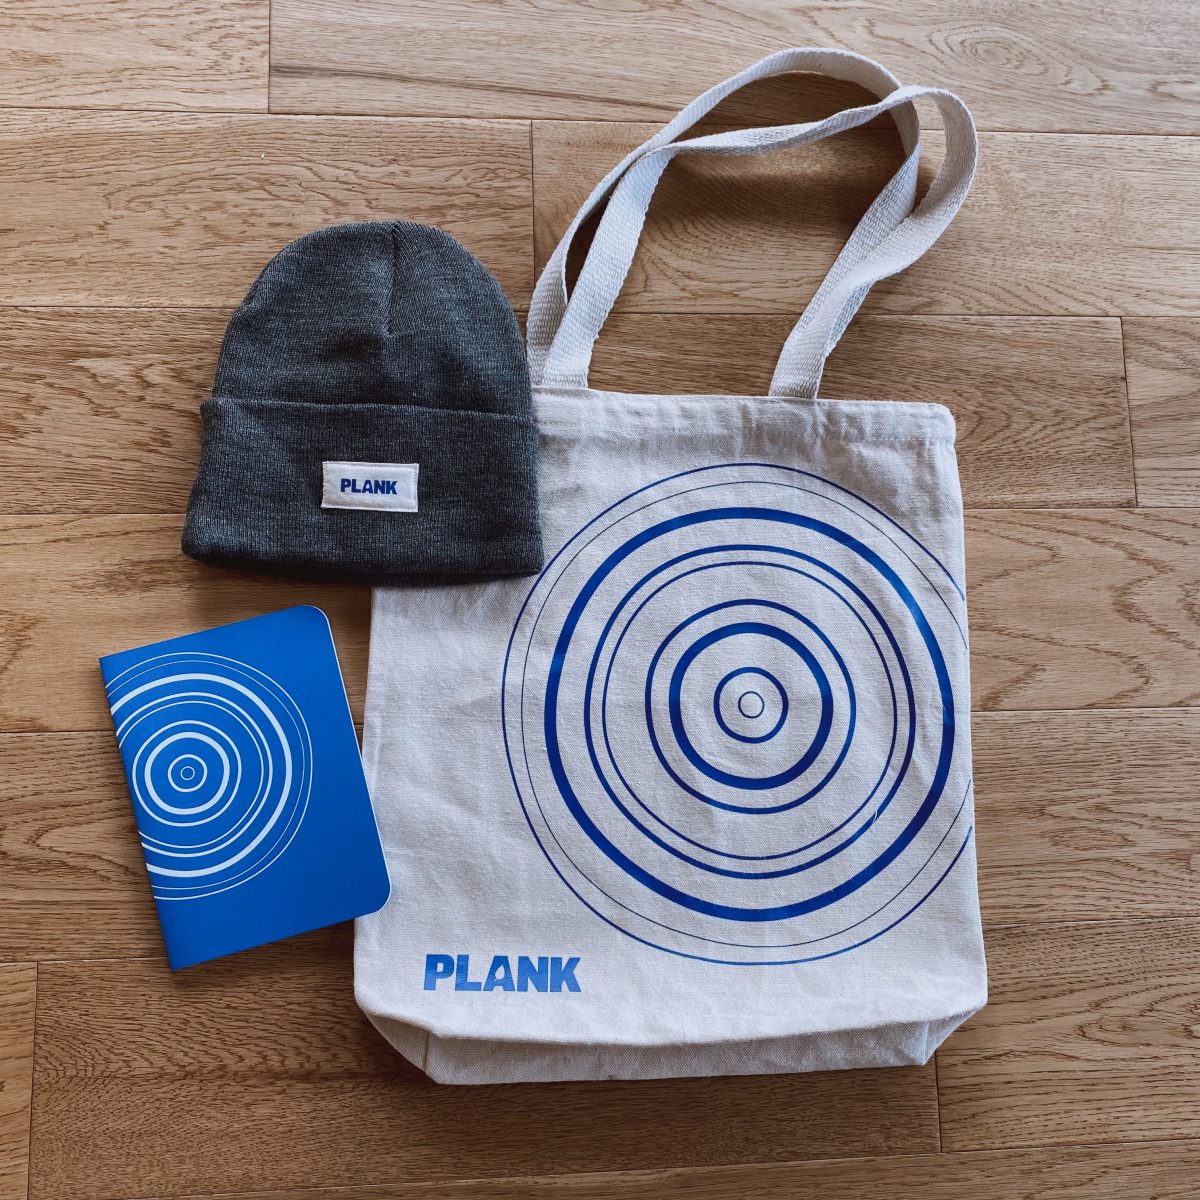 A cream tote and notebook with a blue circle design, and a beanie with our logo all laid down on a wood floor